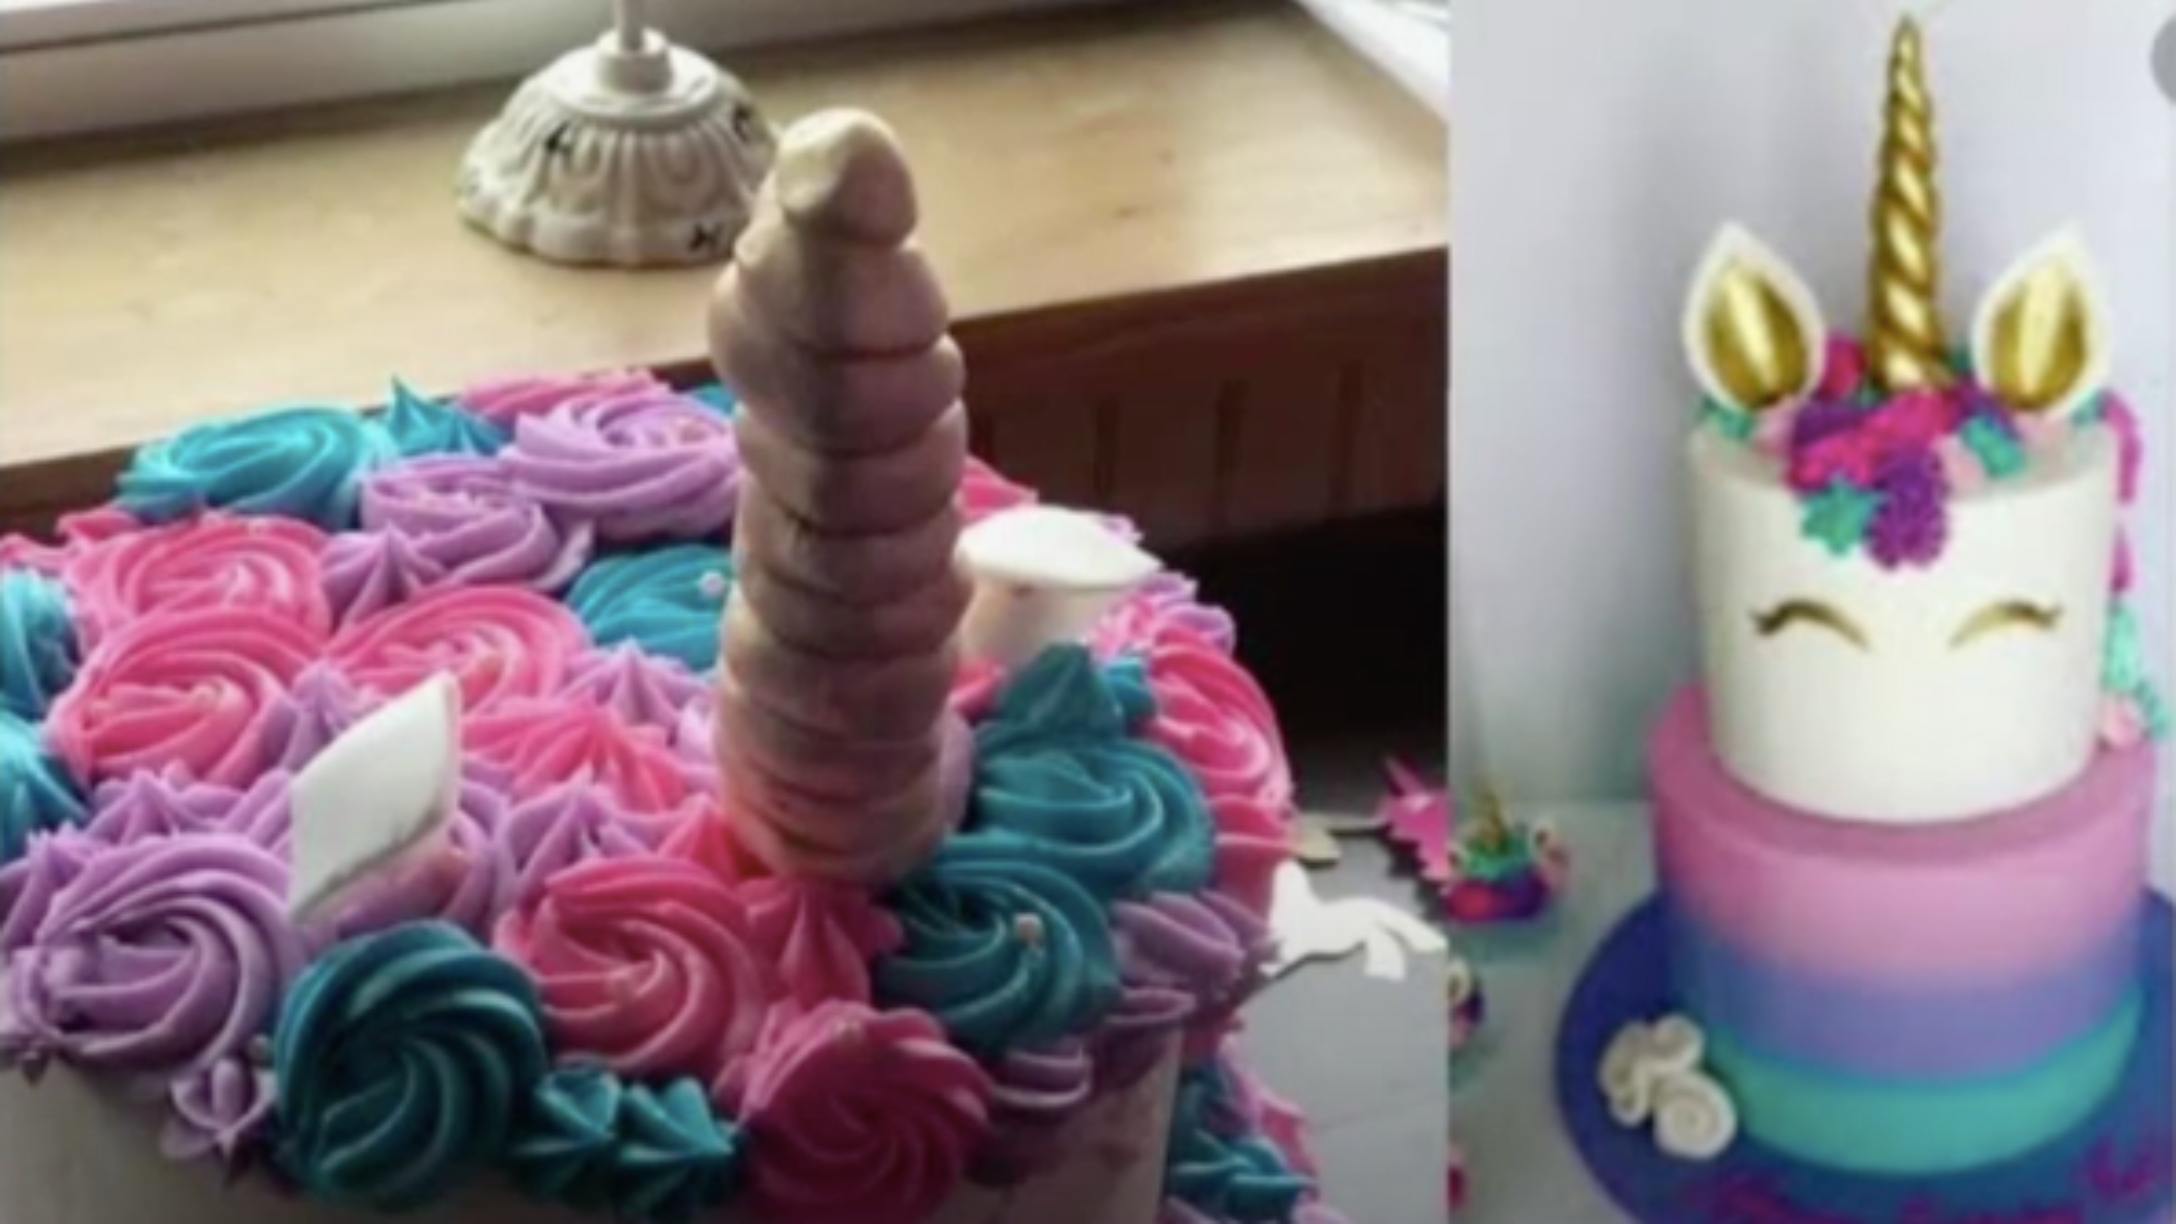 Mum's Attempt At Making Unicorn Cake Ends Up Looking Like A Sex Toy -  LADbible